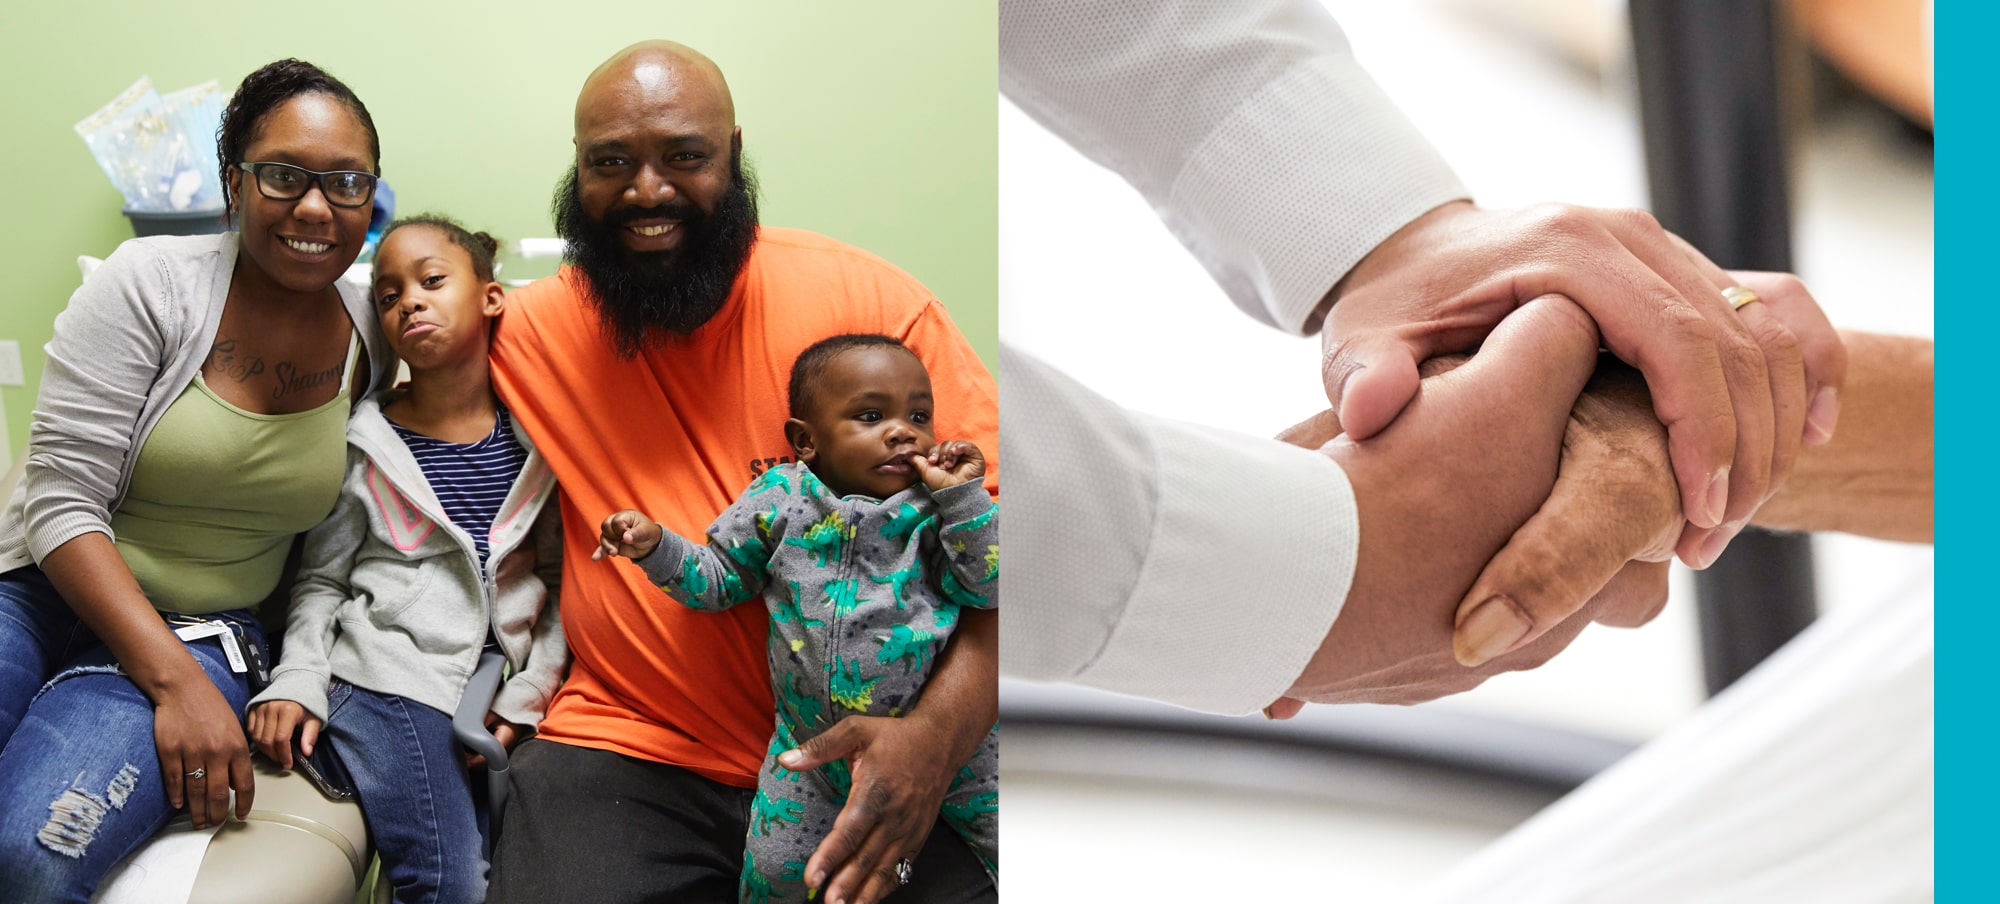 Collage of Black family and a doctor's hands holding a patient's hand